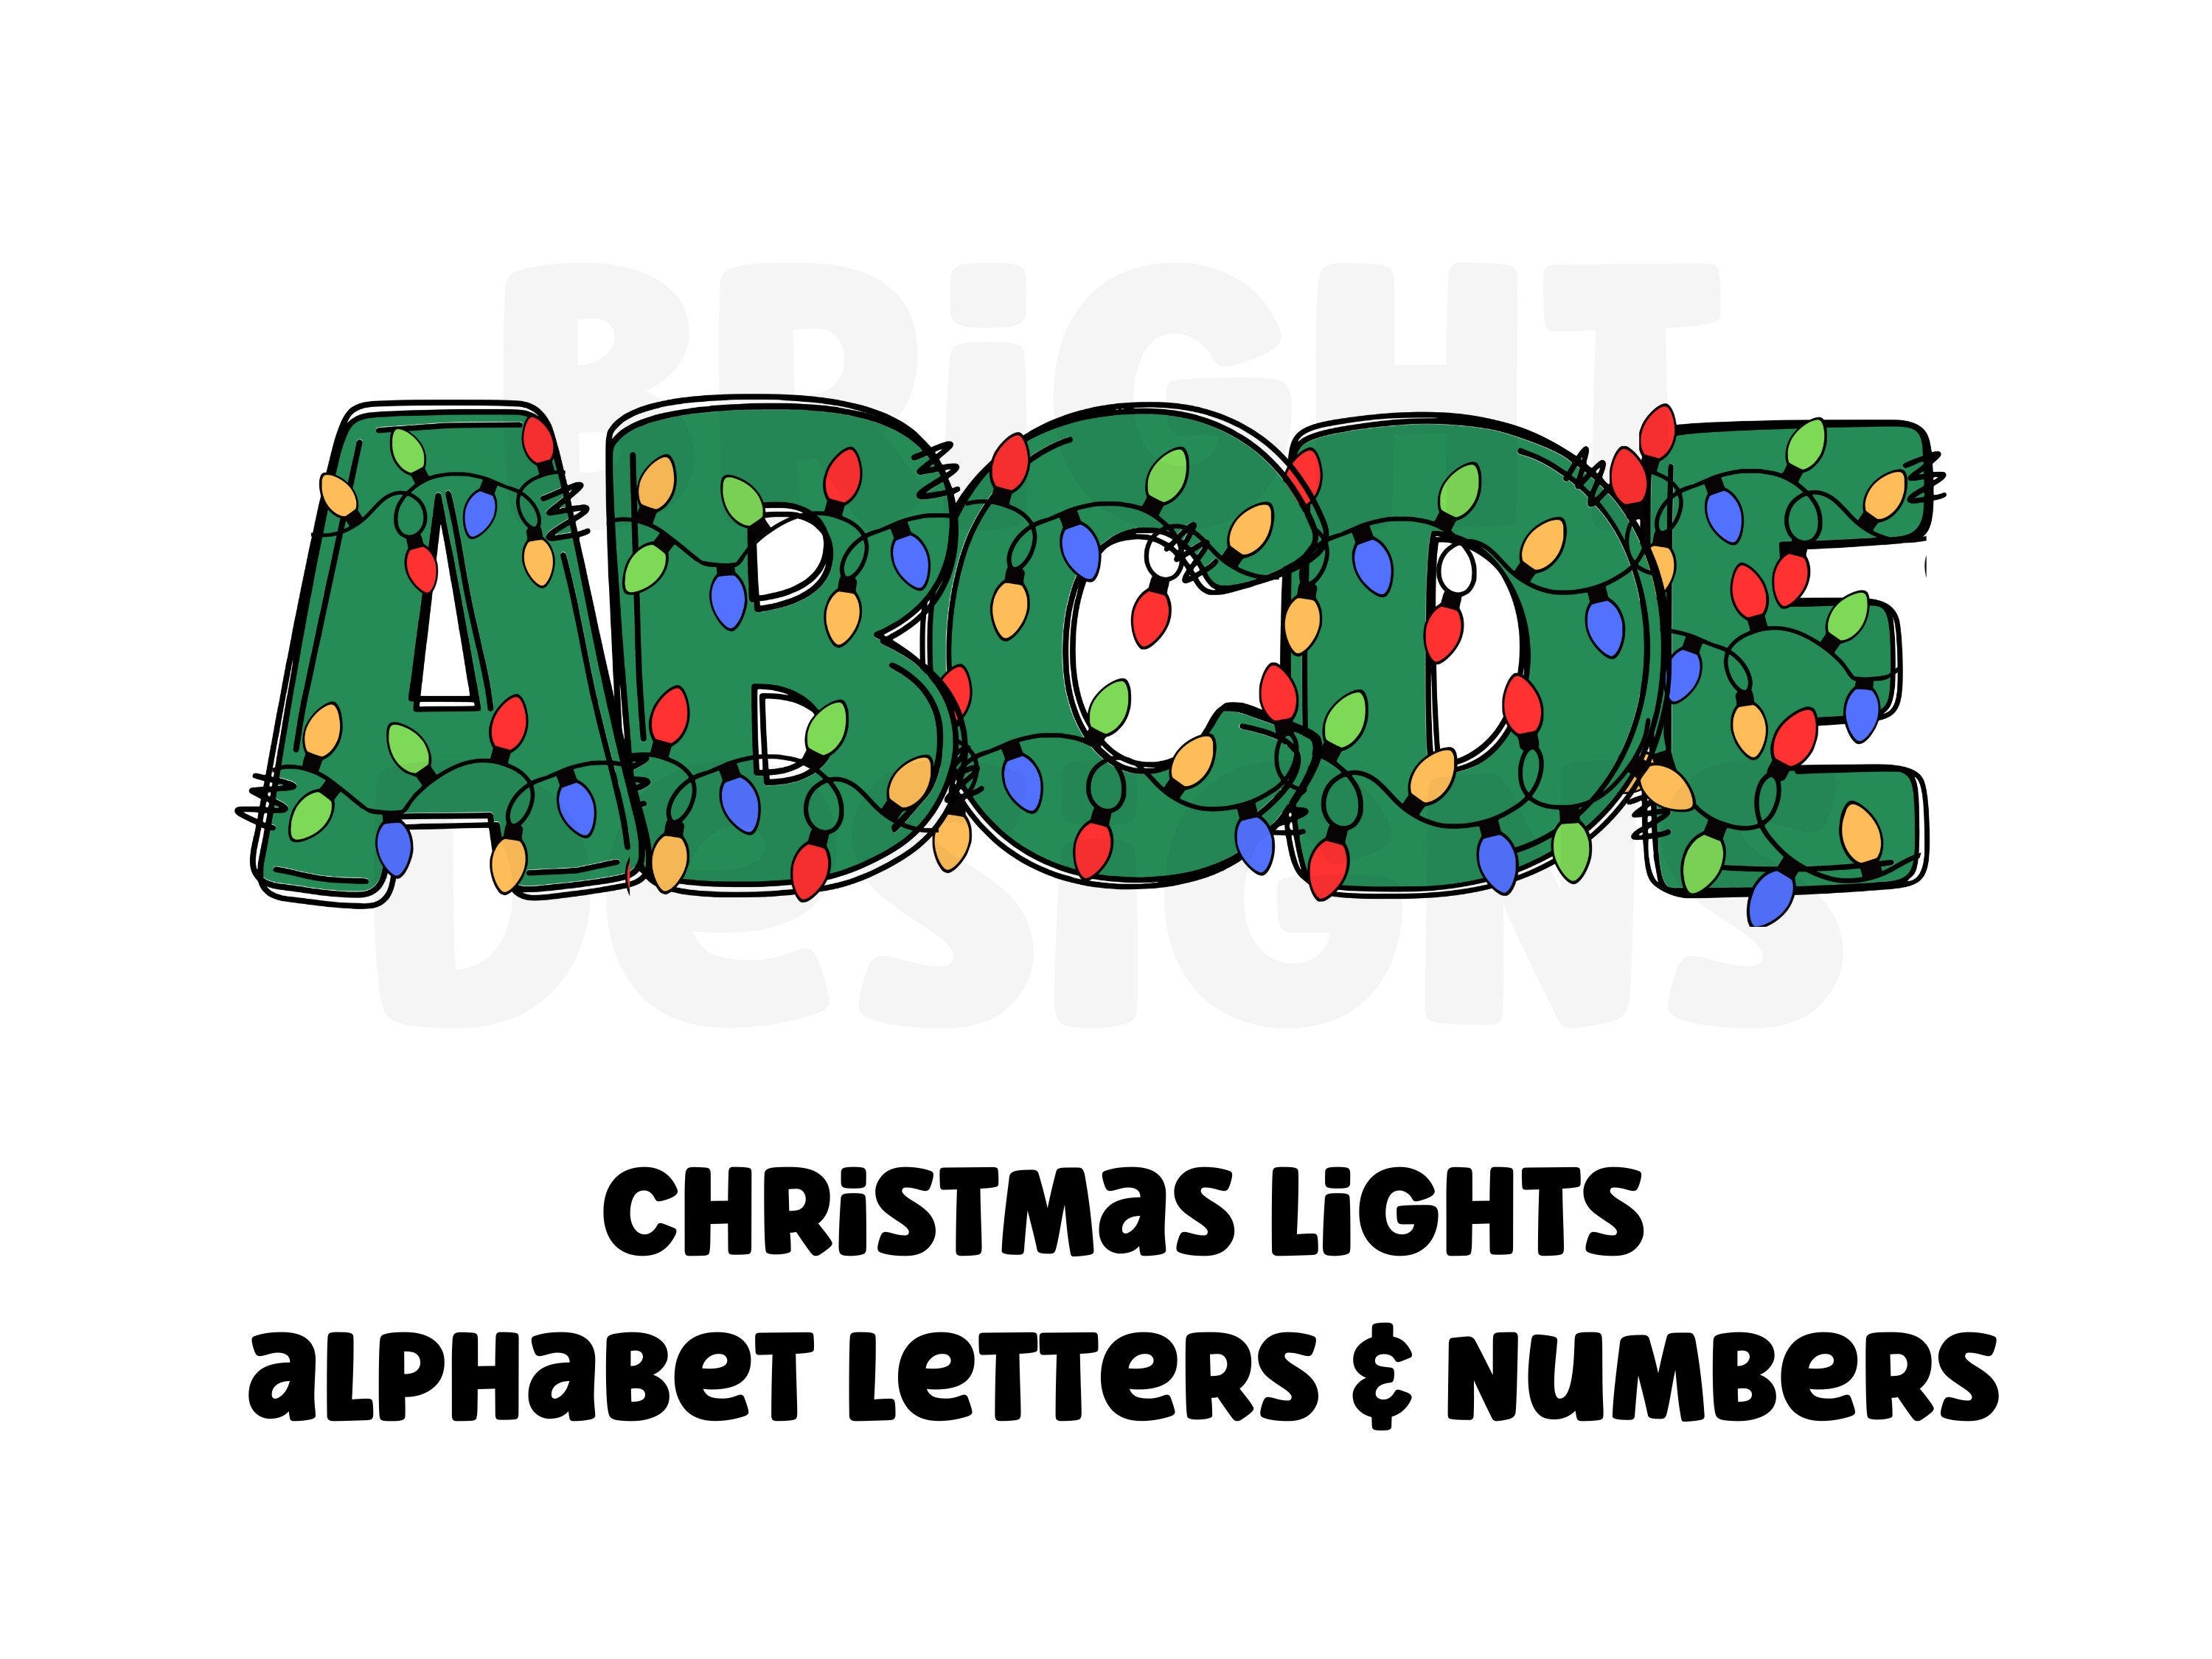 Christmas lights clipart letters 300dpi transparent png. 1 set of alphabet letters A-Z. Uppercase letters and numbers